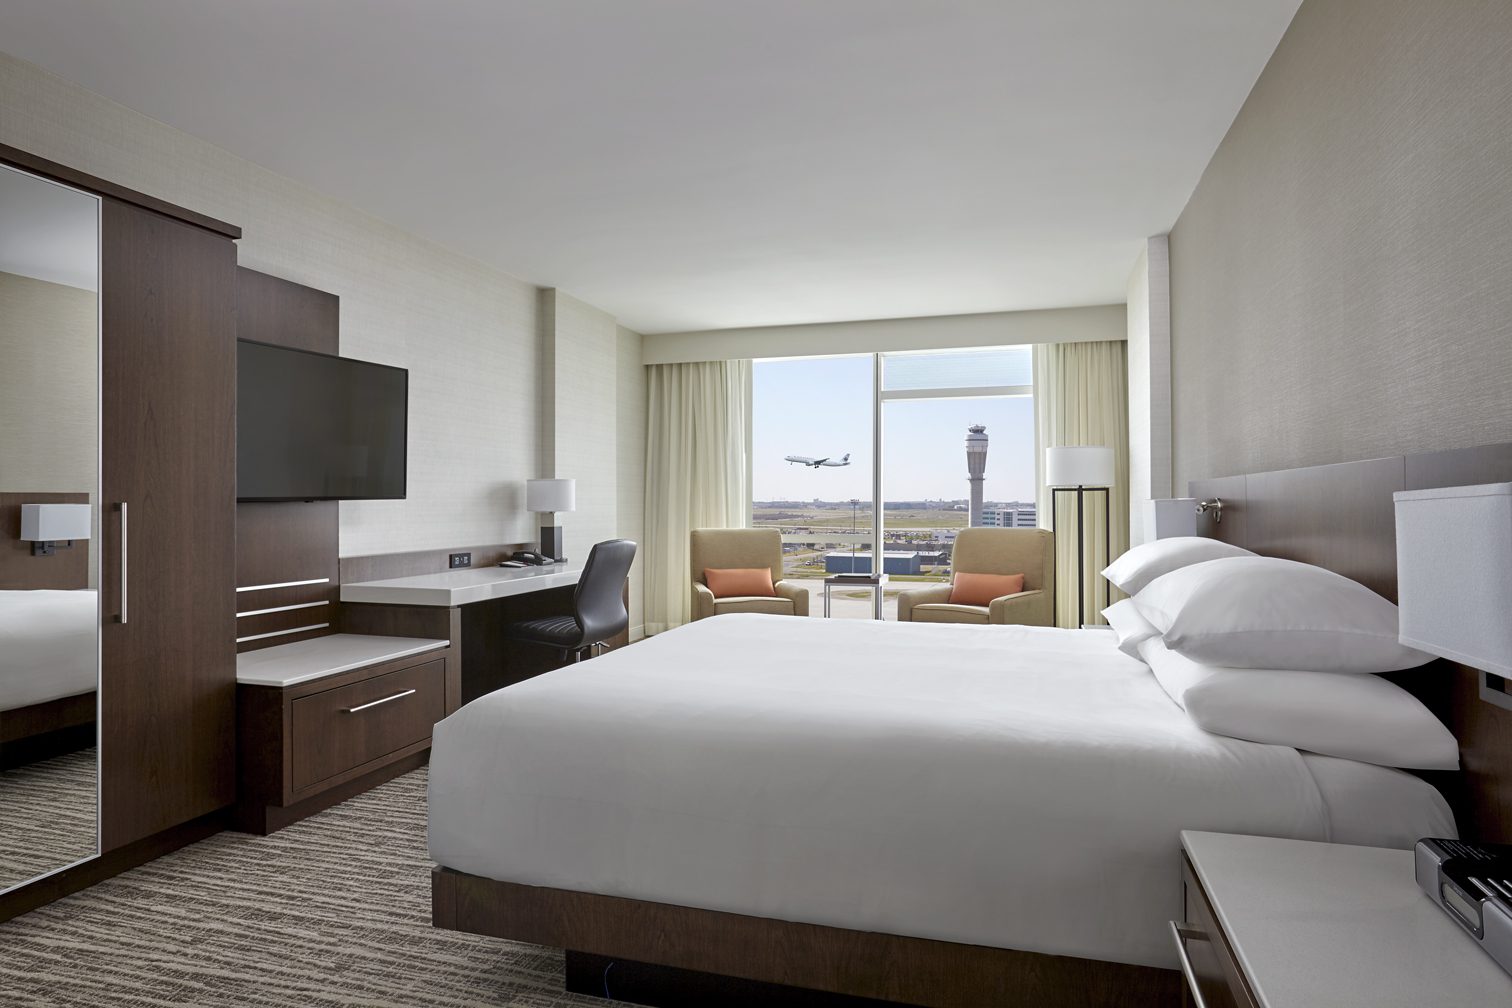 Why you should stay at the Calgary Airport Marriott Hotel